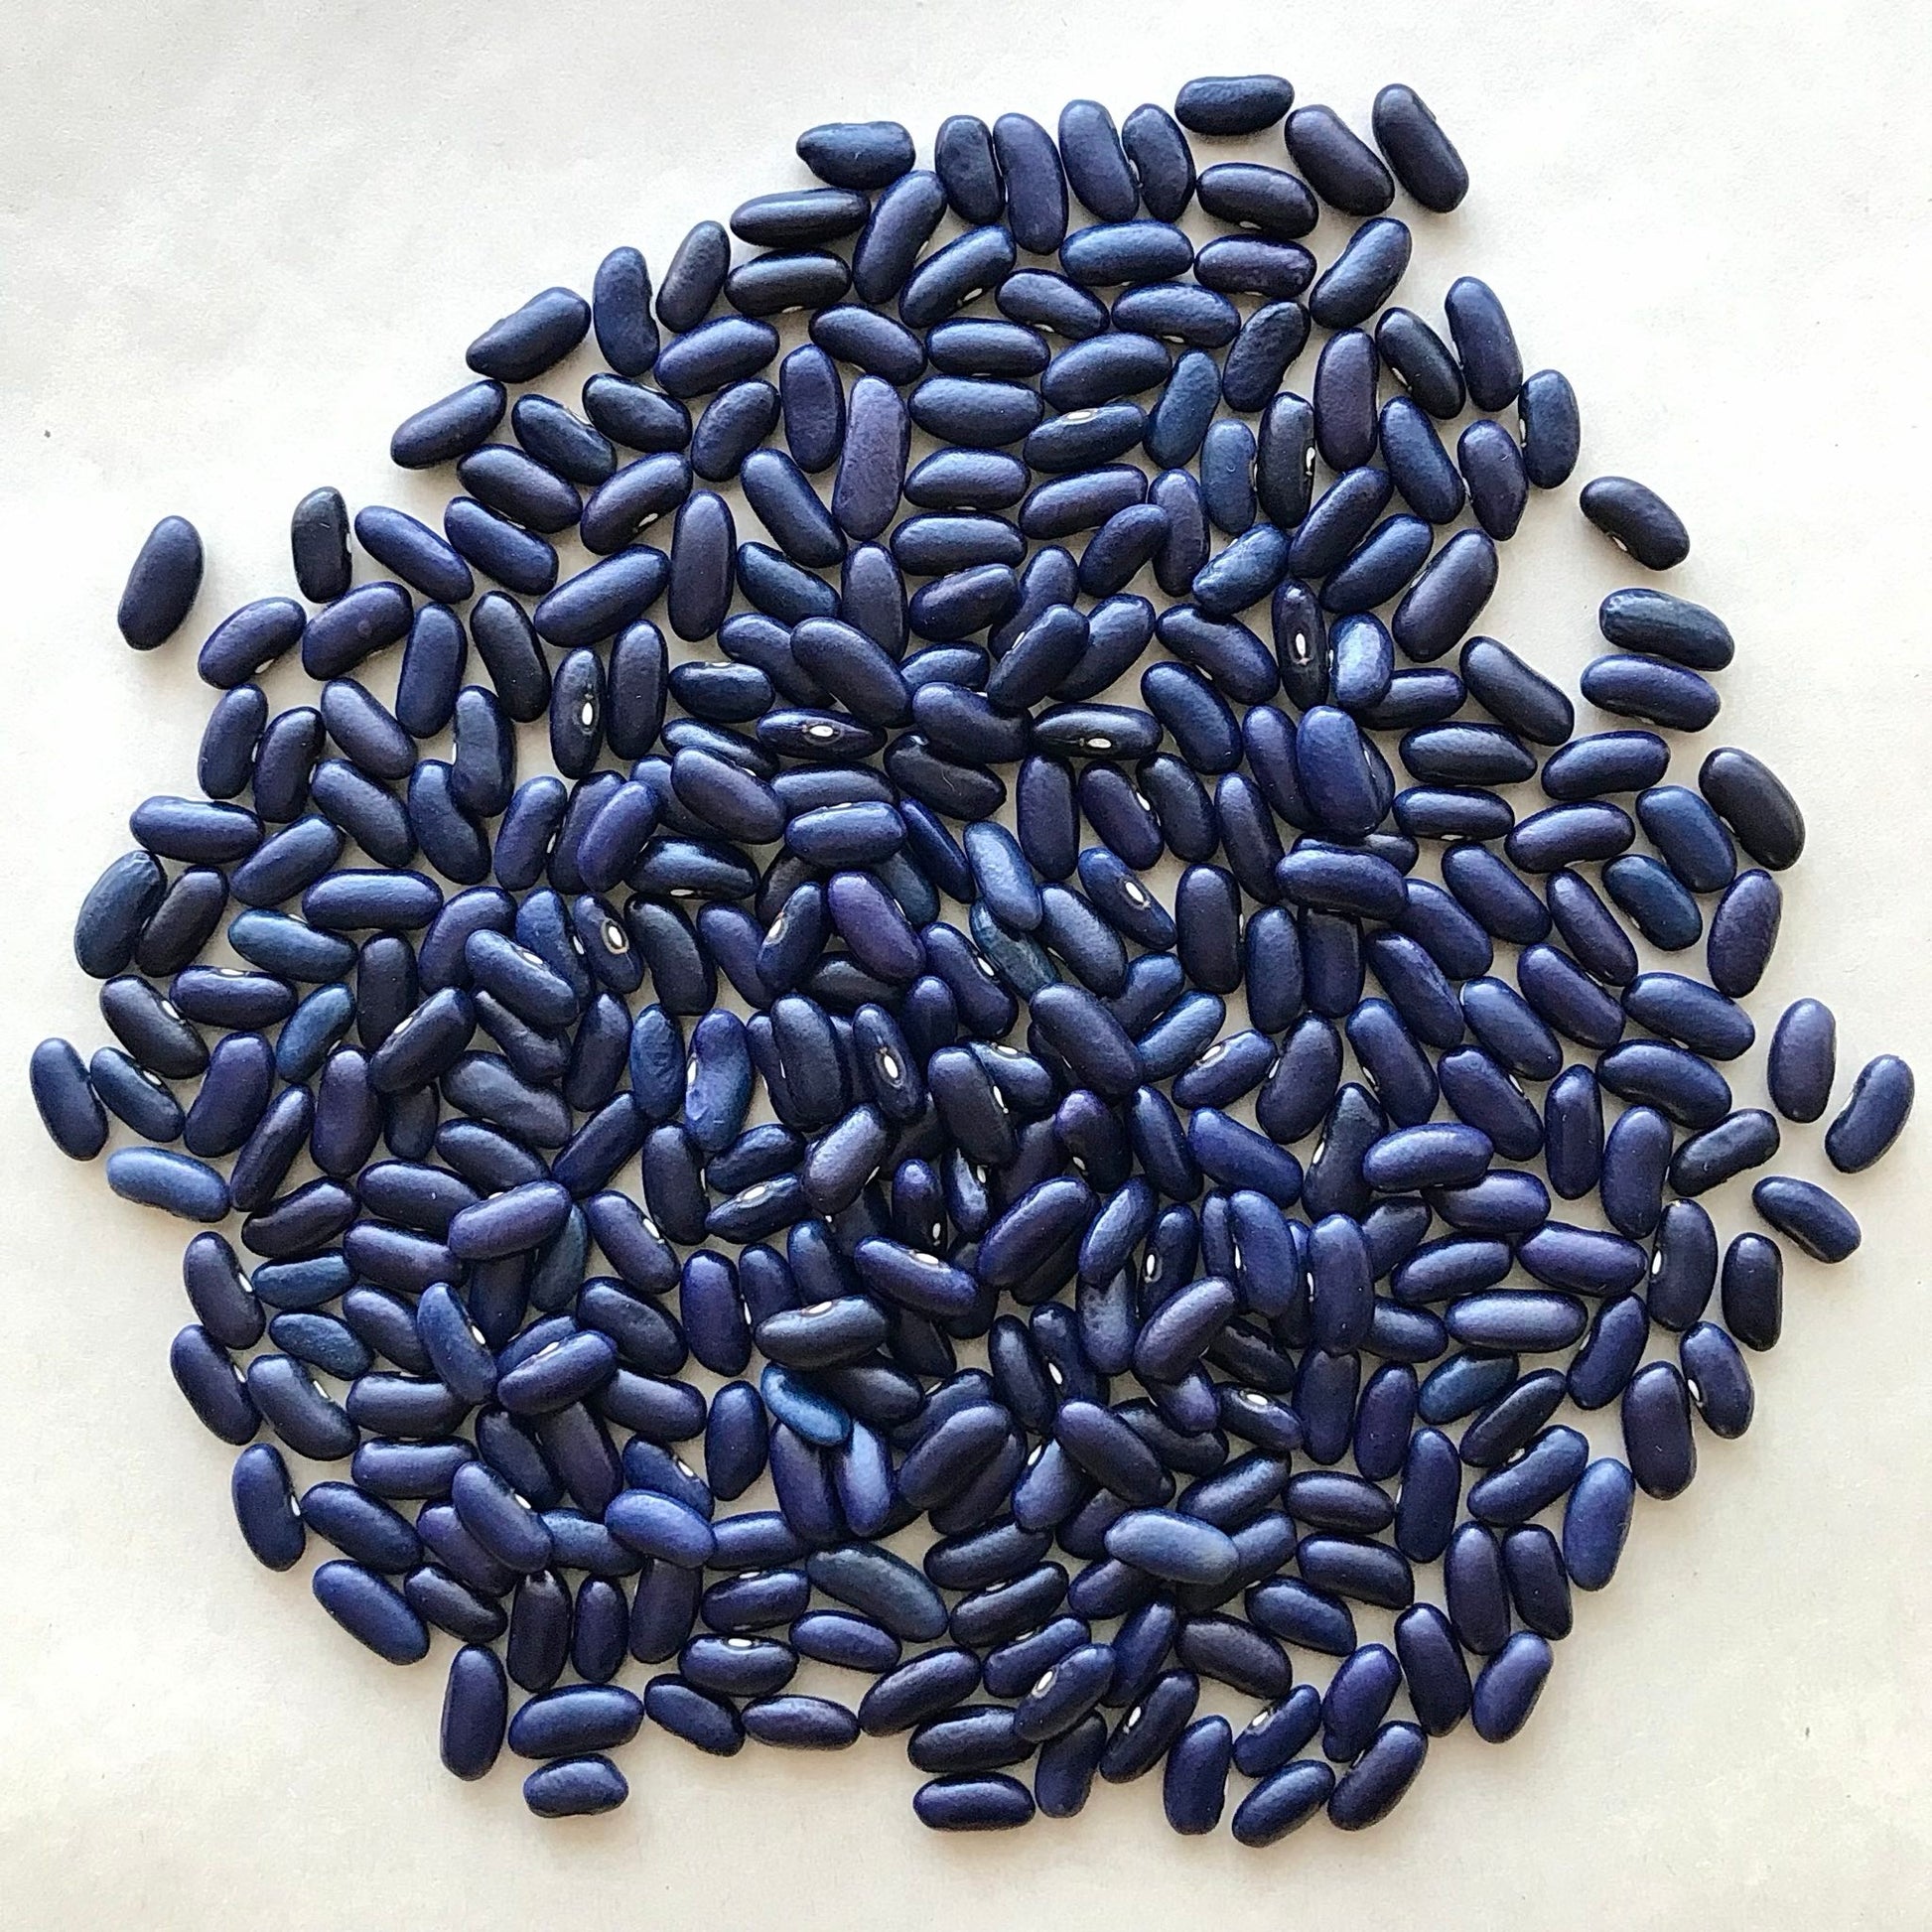 Blue kidney bean seeds in a round pile on a white background.